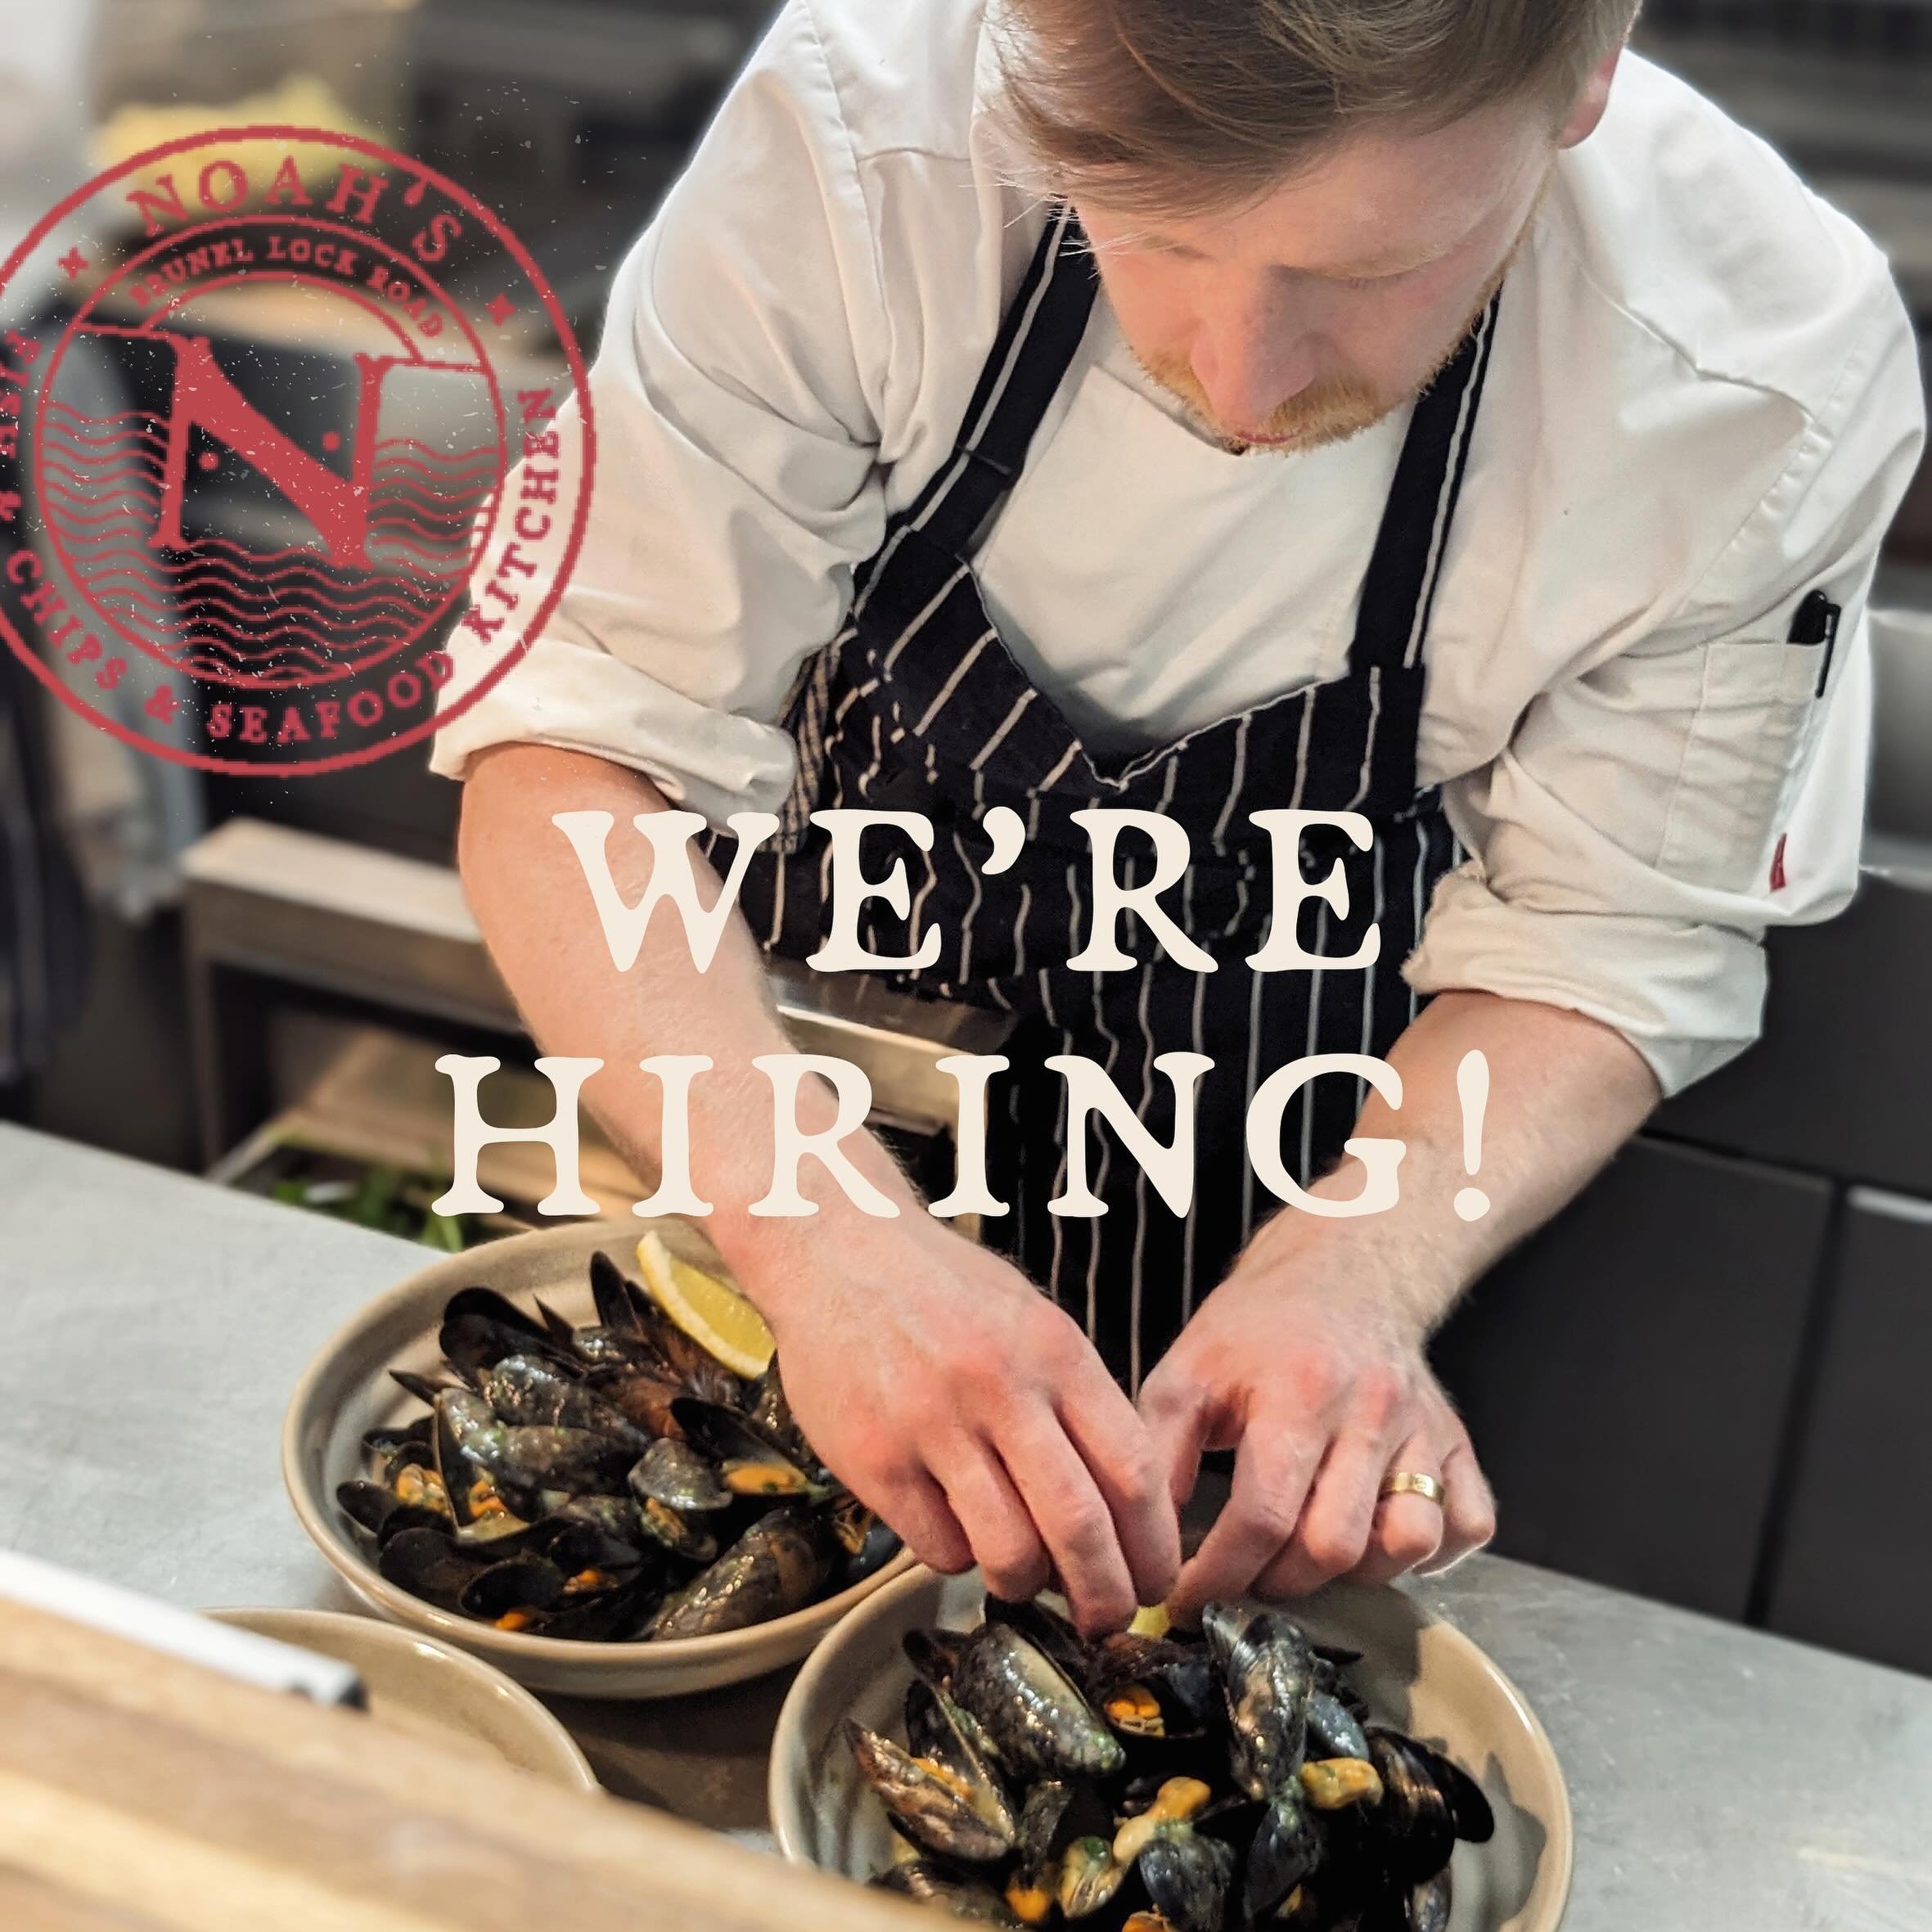 🌊 Join our team in Bristol! 🌊

With our new outdoor terrace coming very soon, we&rsquo;re on the lookout for more team members to join the Noah&rsquo;s family.

We&rsquo;re recruiting:

🔪 Chef de Partie
🥂 Front of House 

As a family-run busin